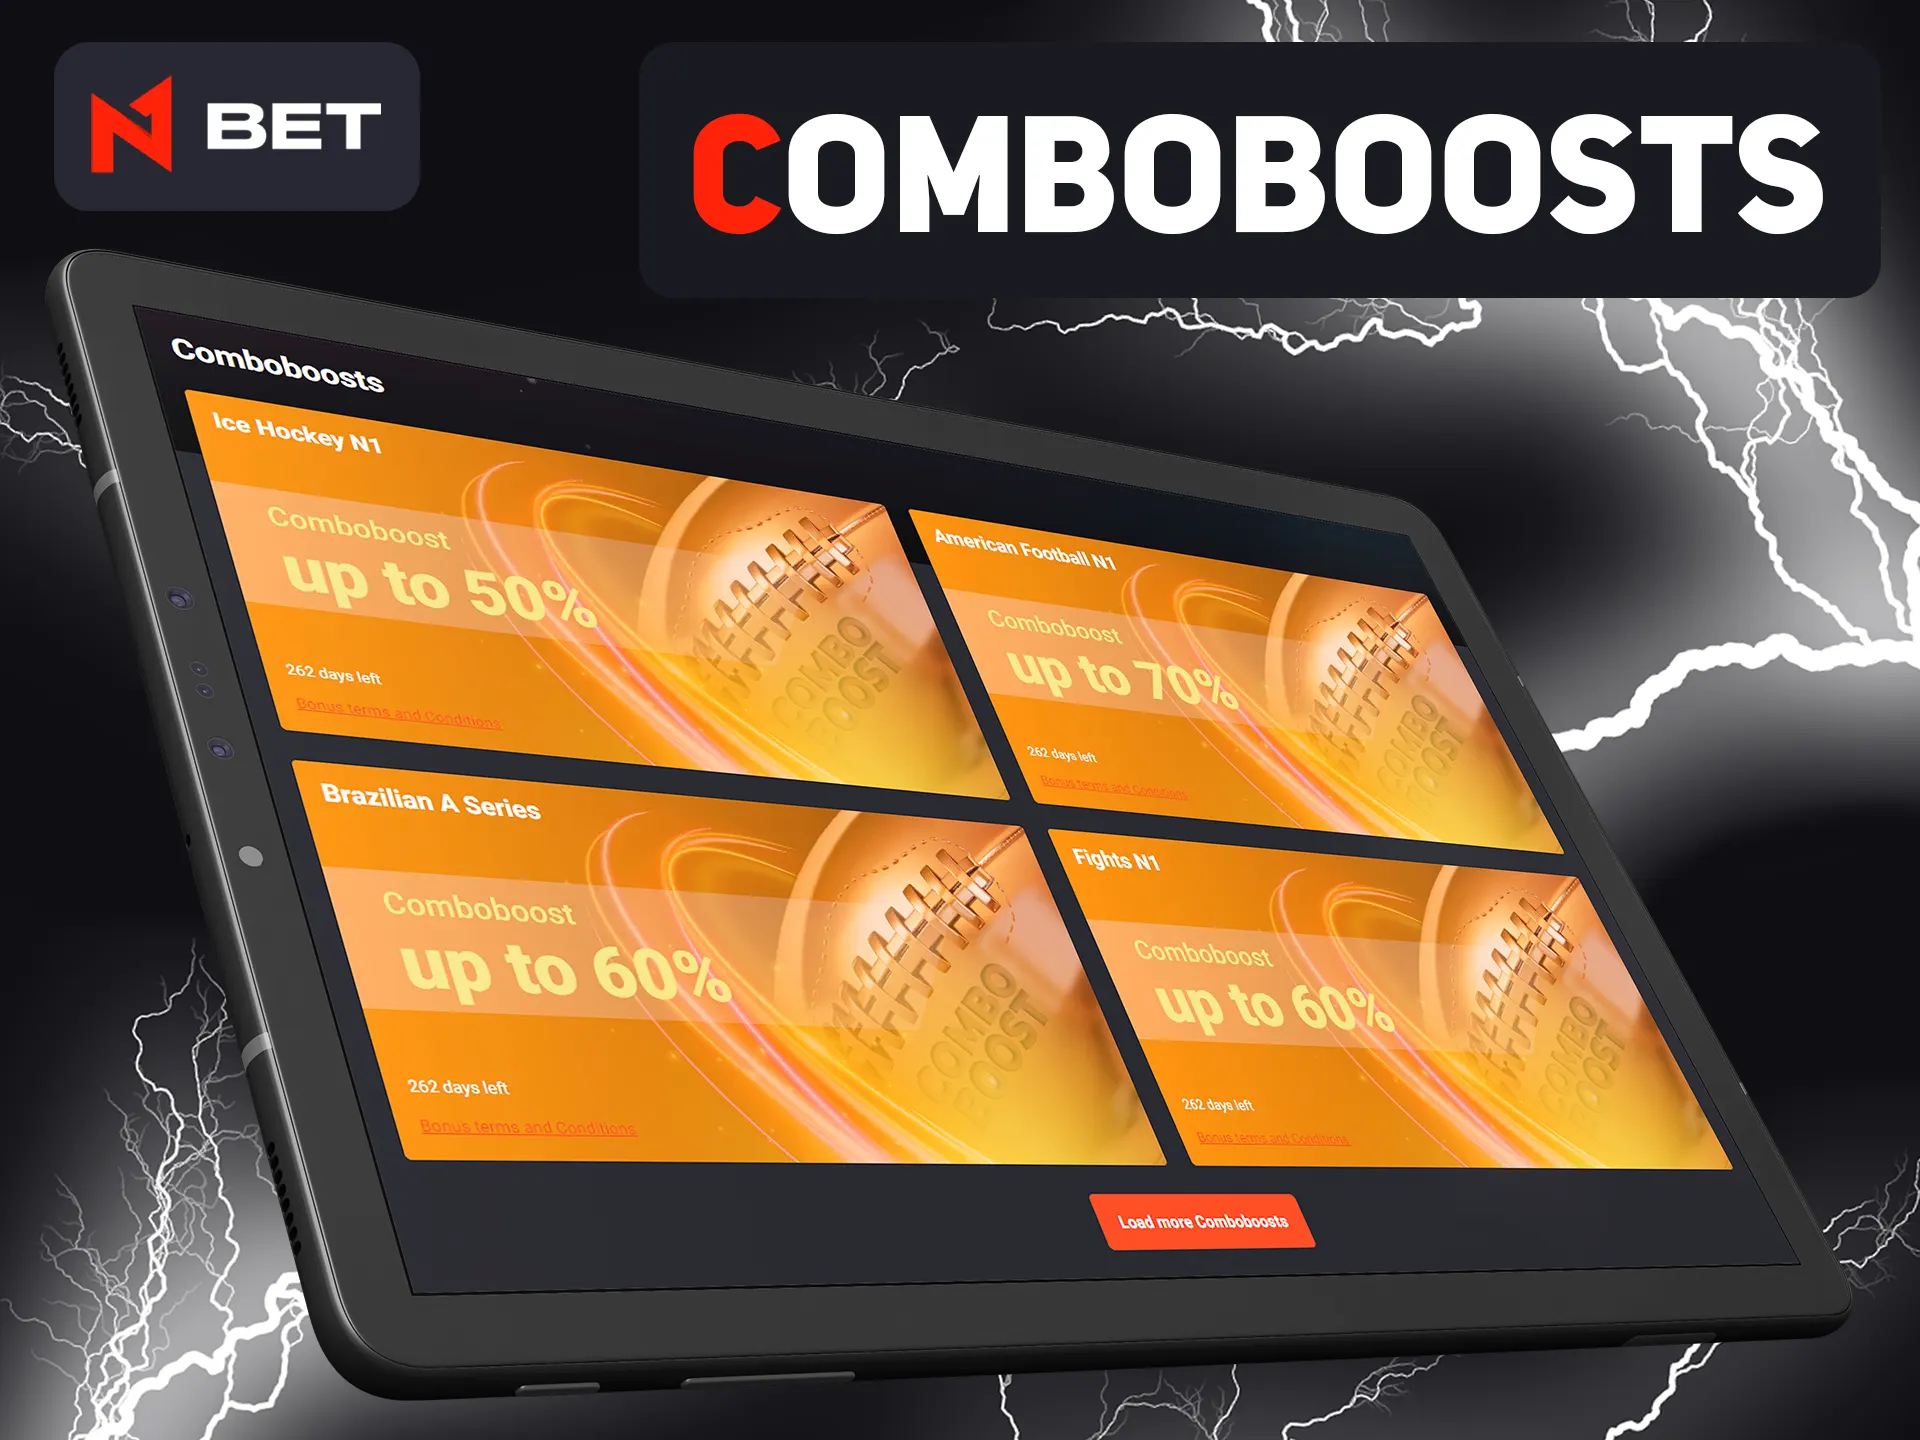 Multiple your winnings with N1betcomboboosts.